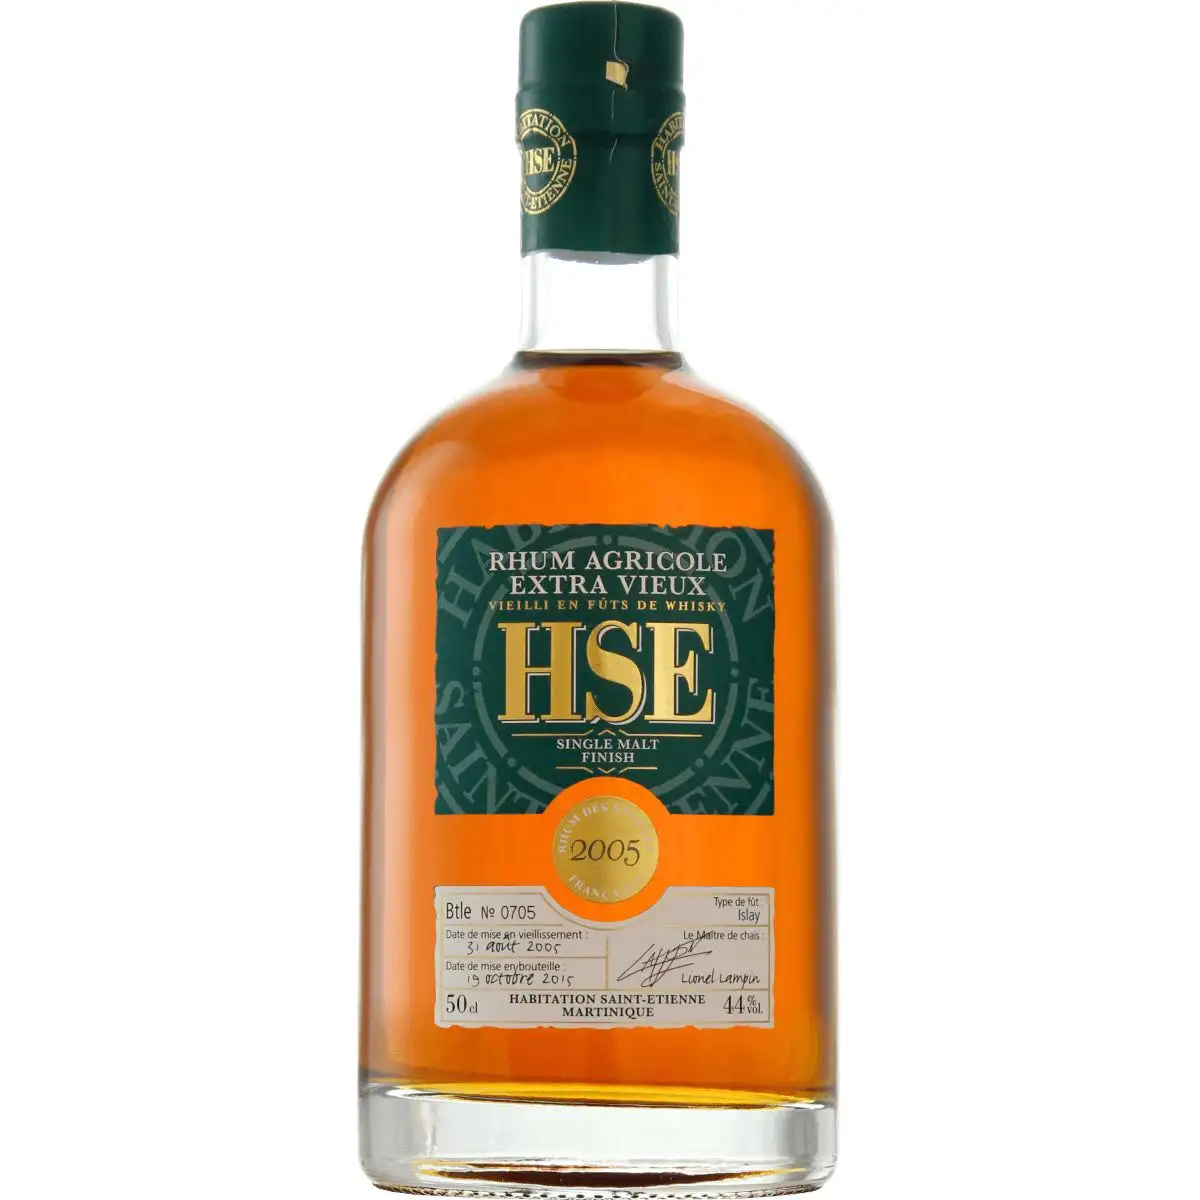 Image of the front of the bottle of the rum HSE Single Malt Islay Finish